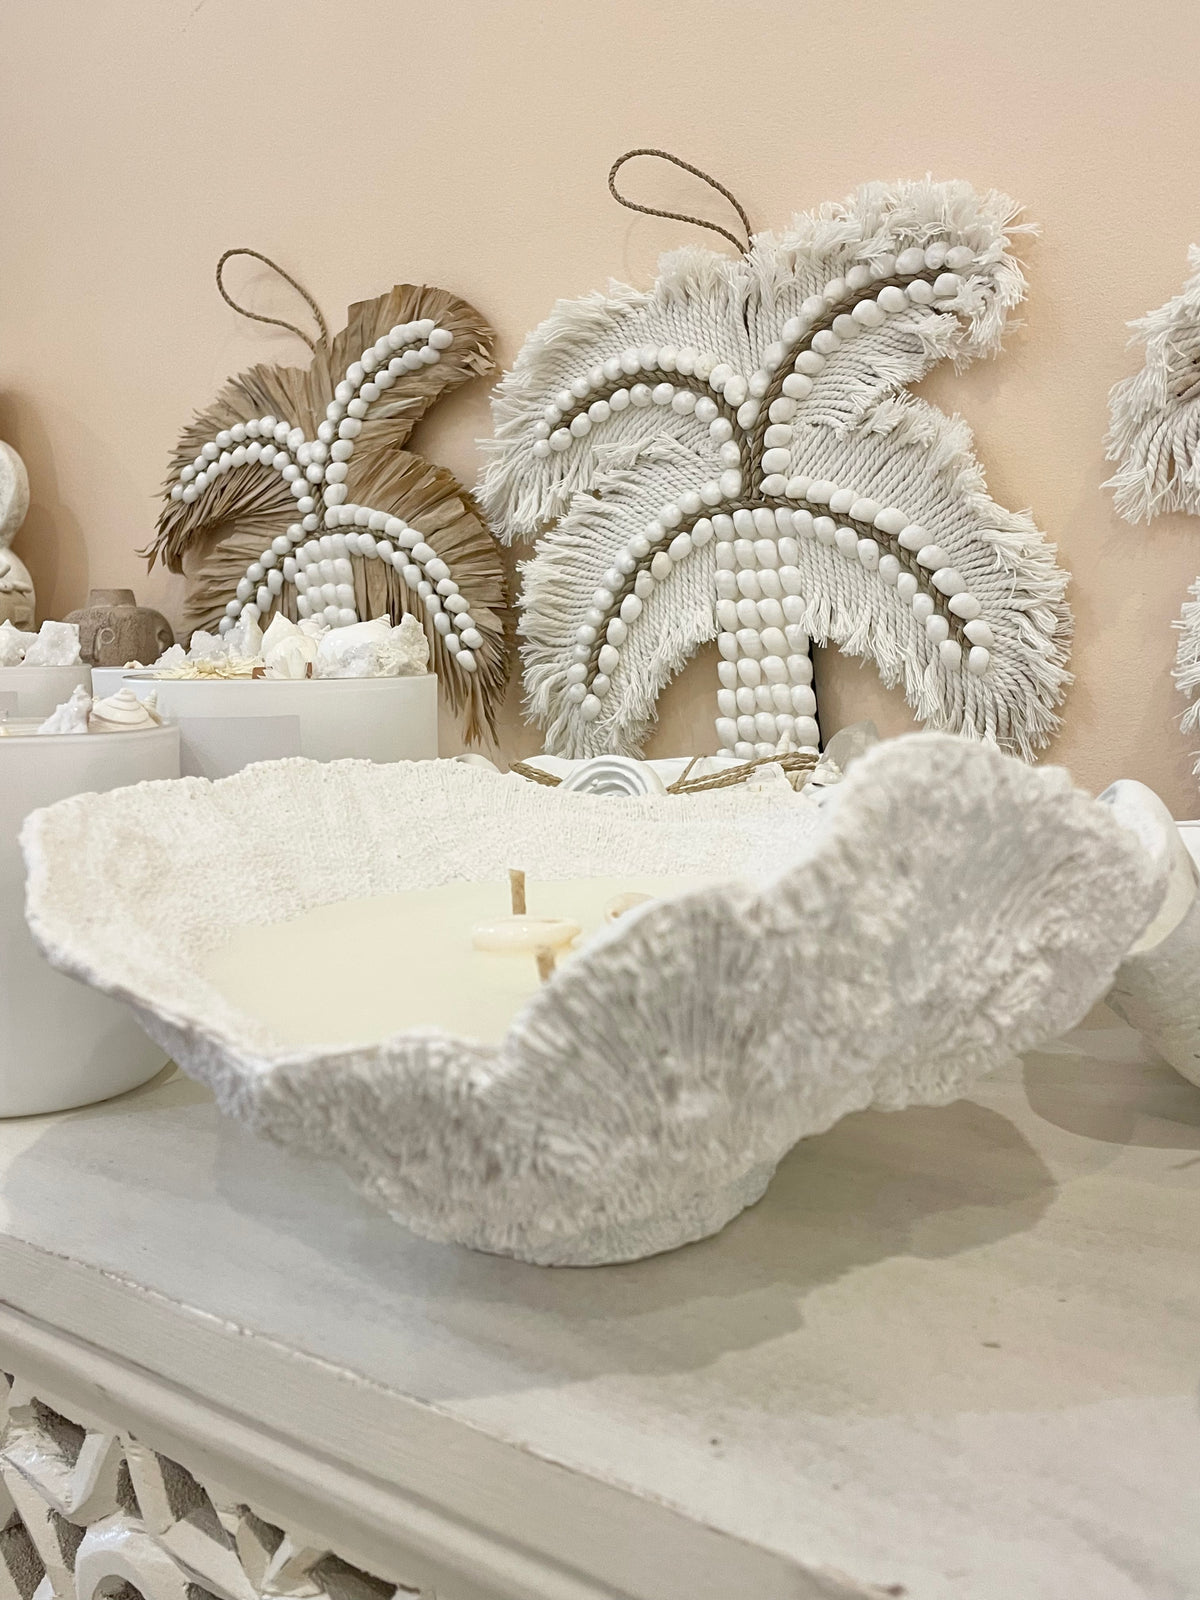 Candle Coral Bowl